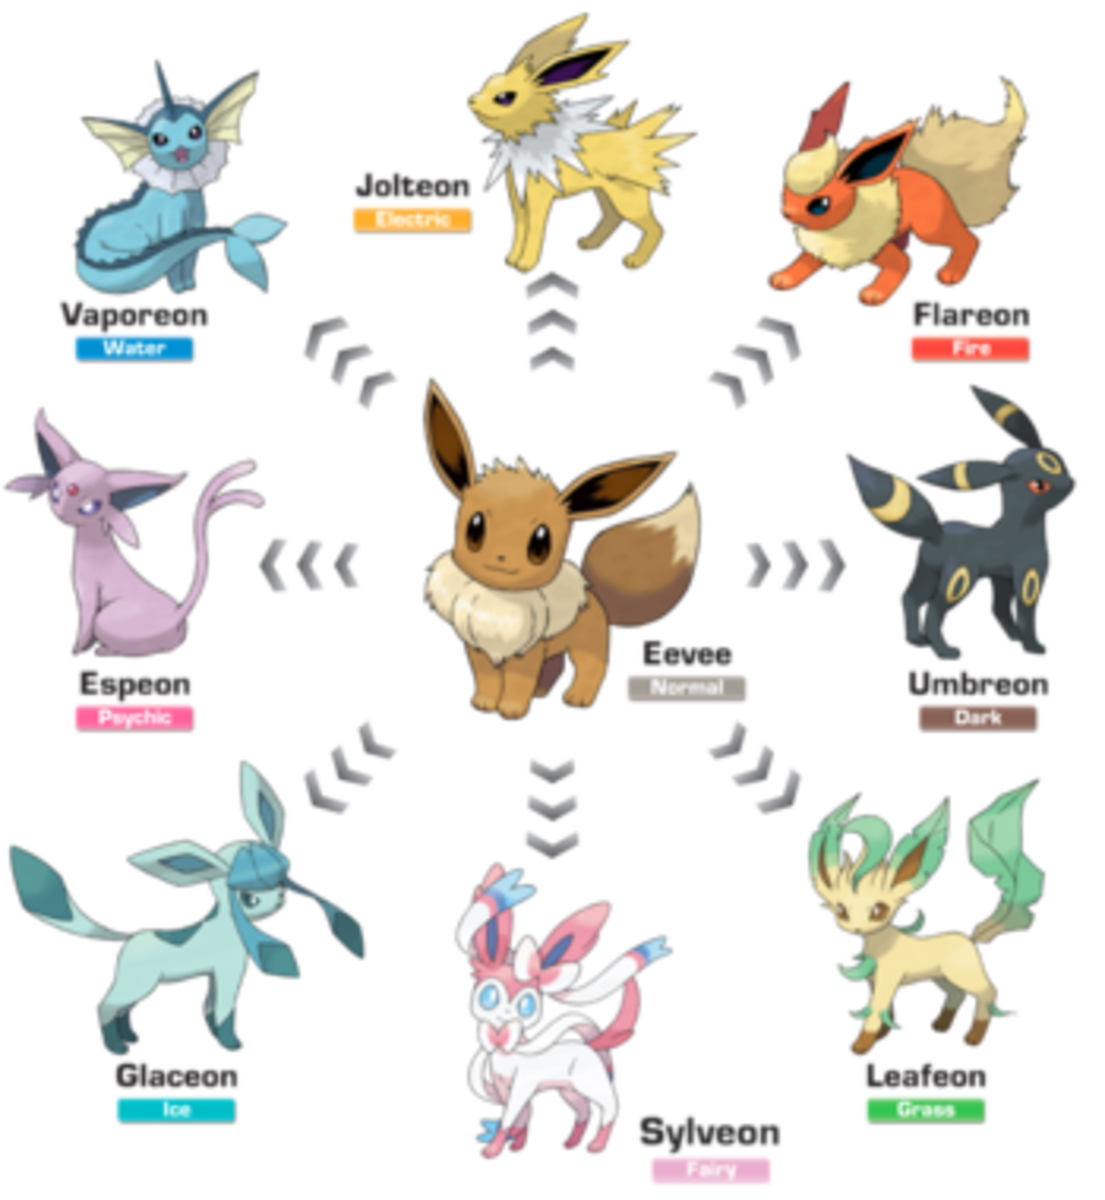 Eevee evolution chart. Note that currently only the Kanto generation of Pokemon has been released on Pokemon Go.